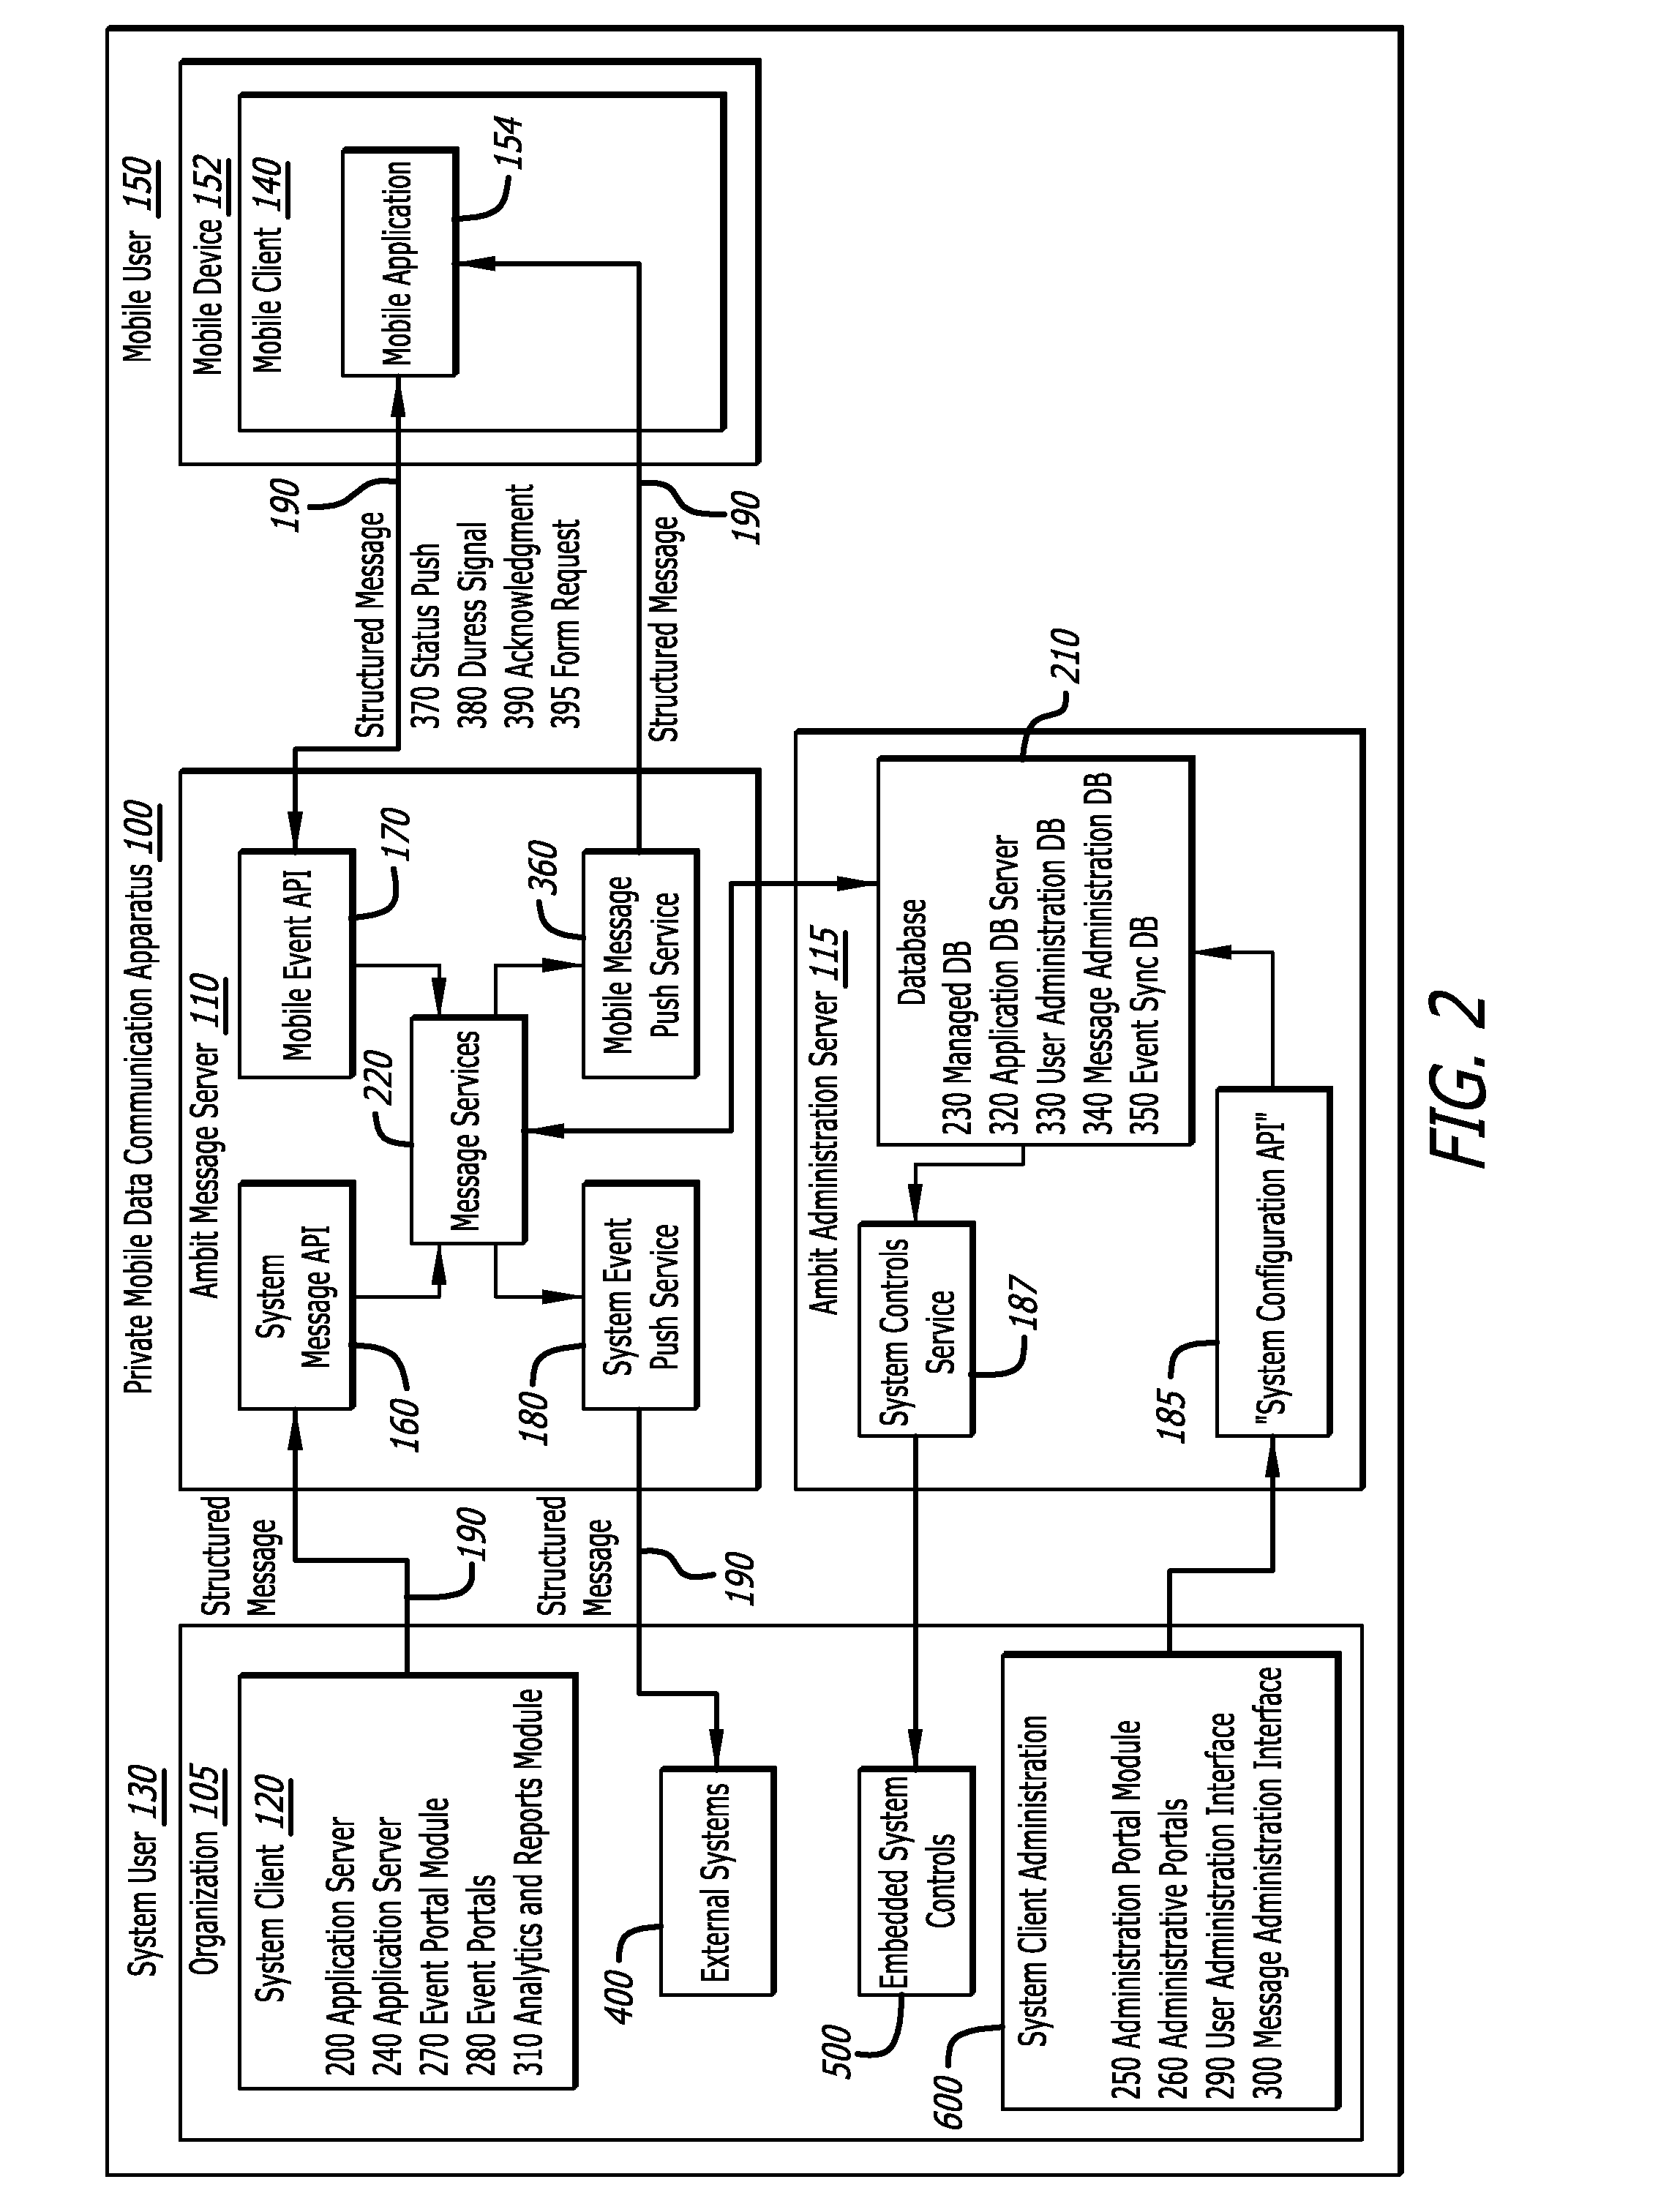 Private mobile messaging and data communications apparatus and method of managing organizational messaging